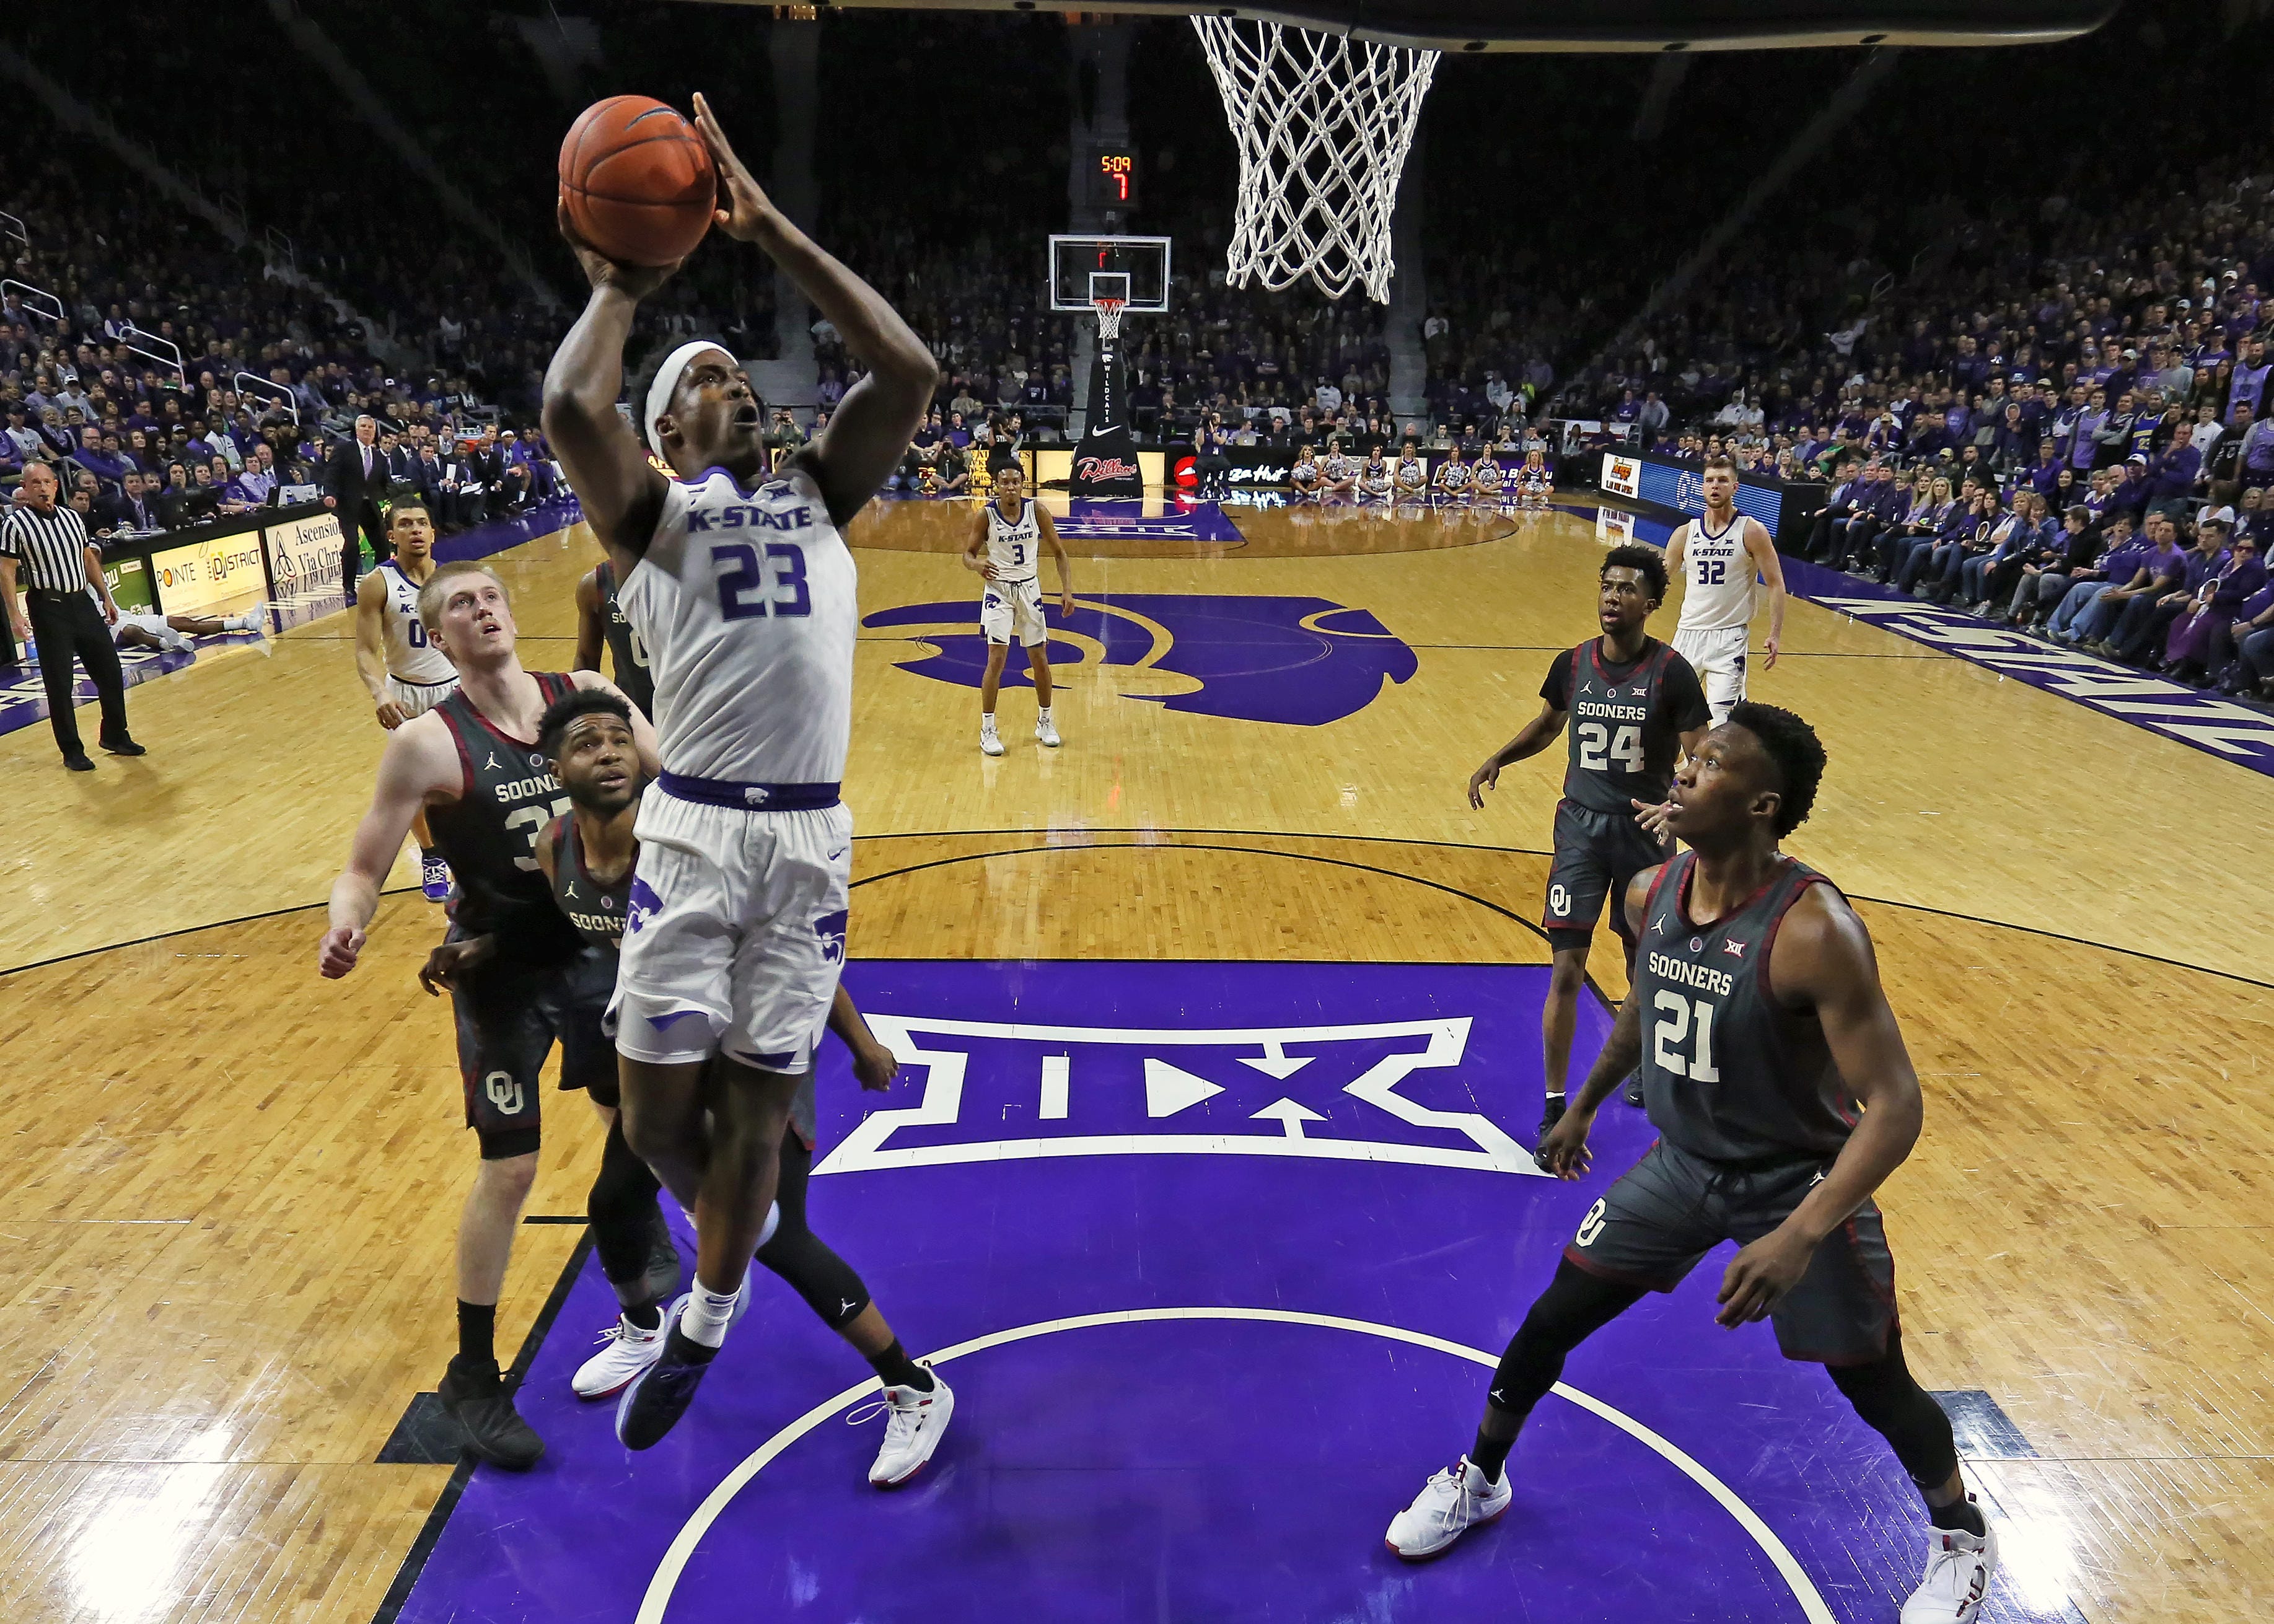 Big 12 tournament 2019 schedule: How to watch NCAA basketball games without cable